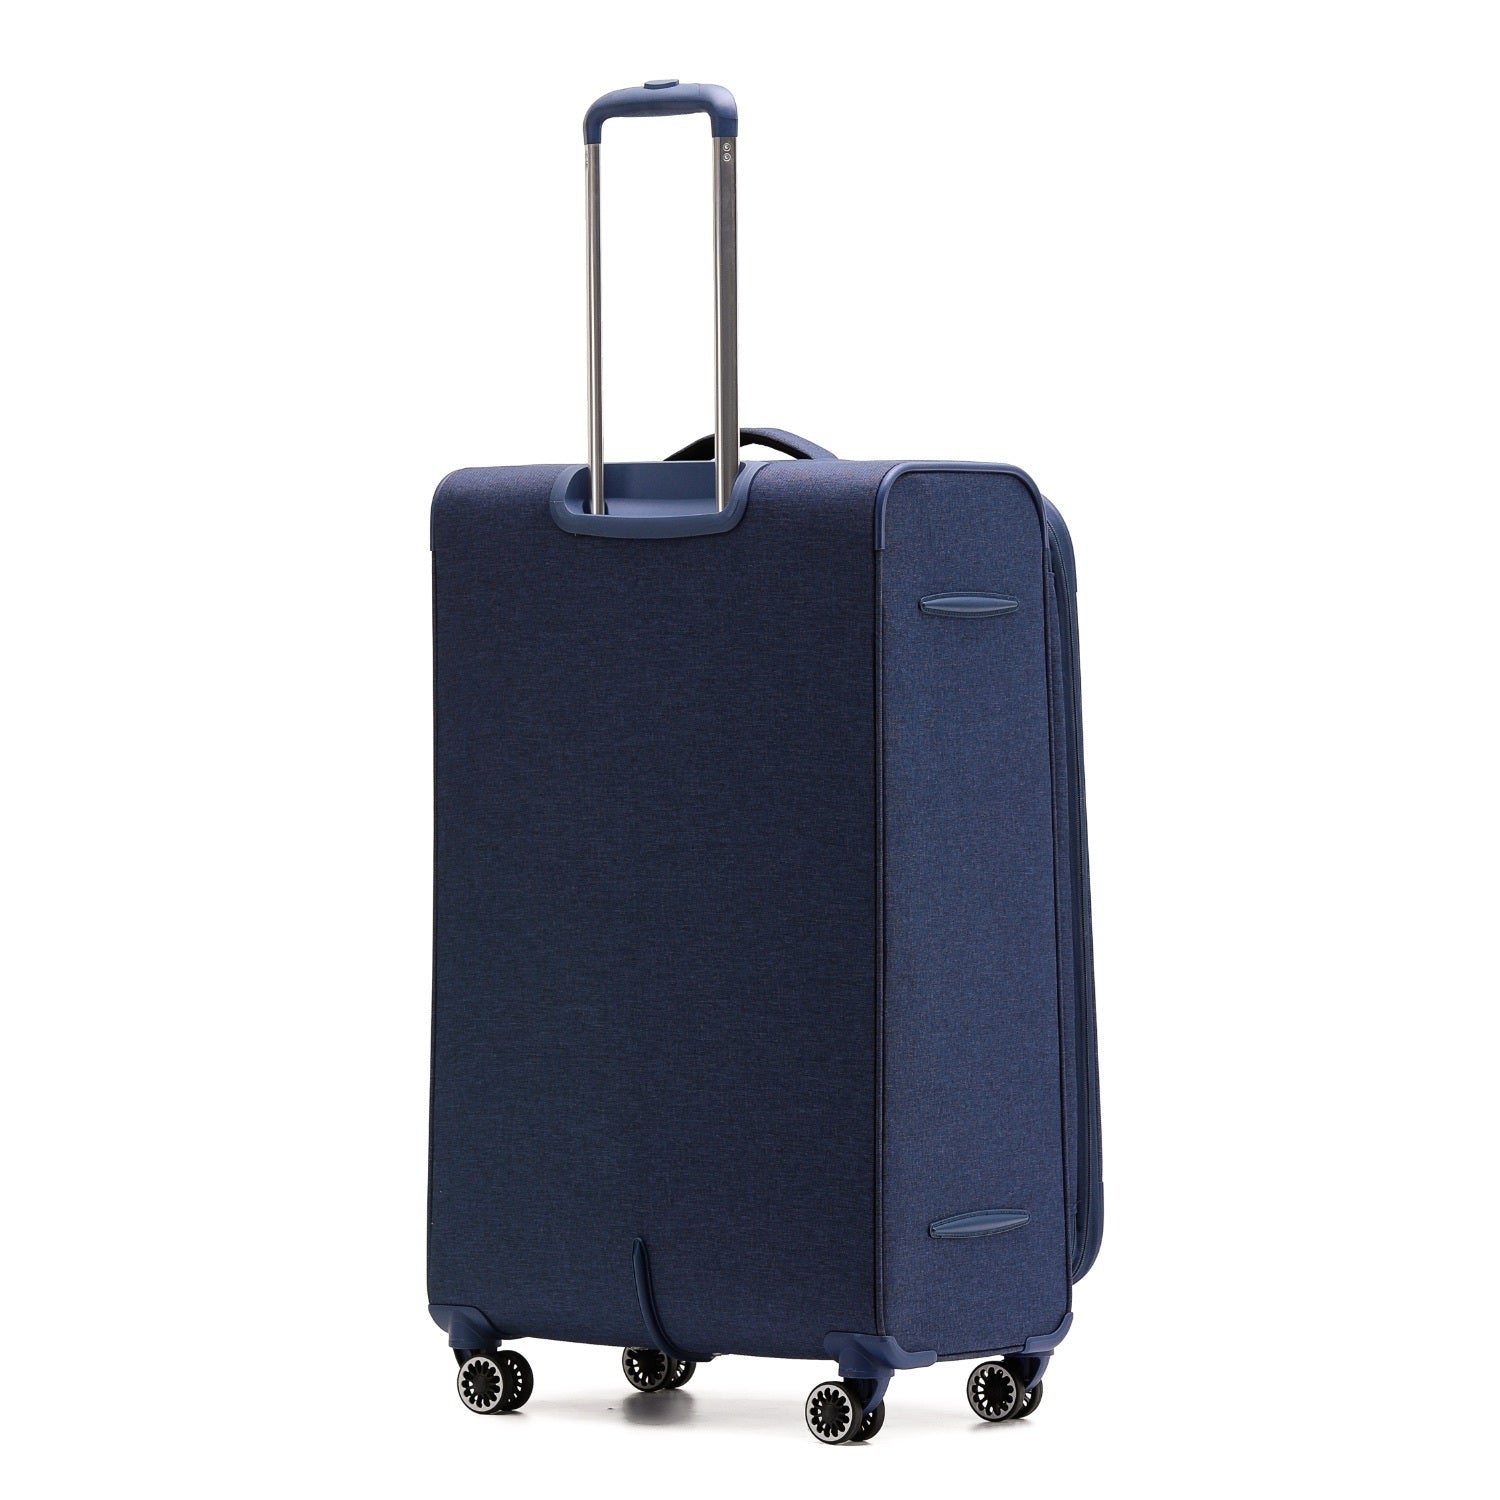 Qantas - QF400 81cm Large Adelaide Soft sided spinner - Navy-6